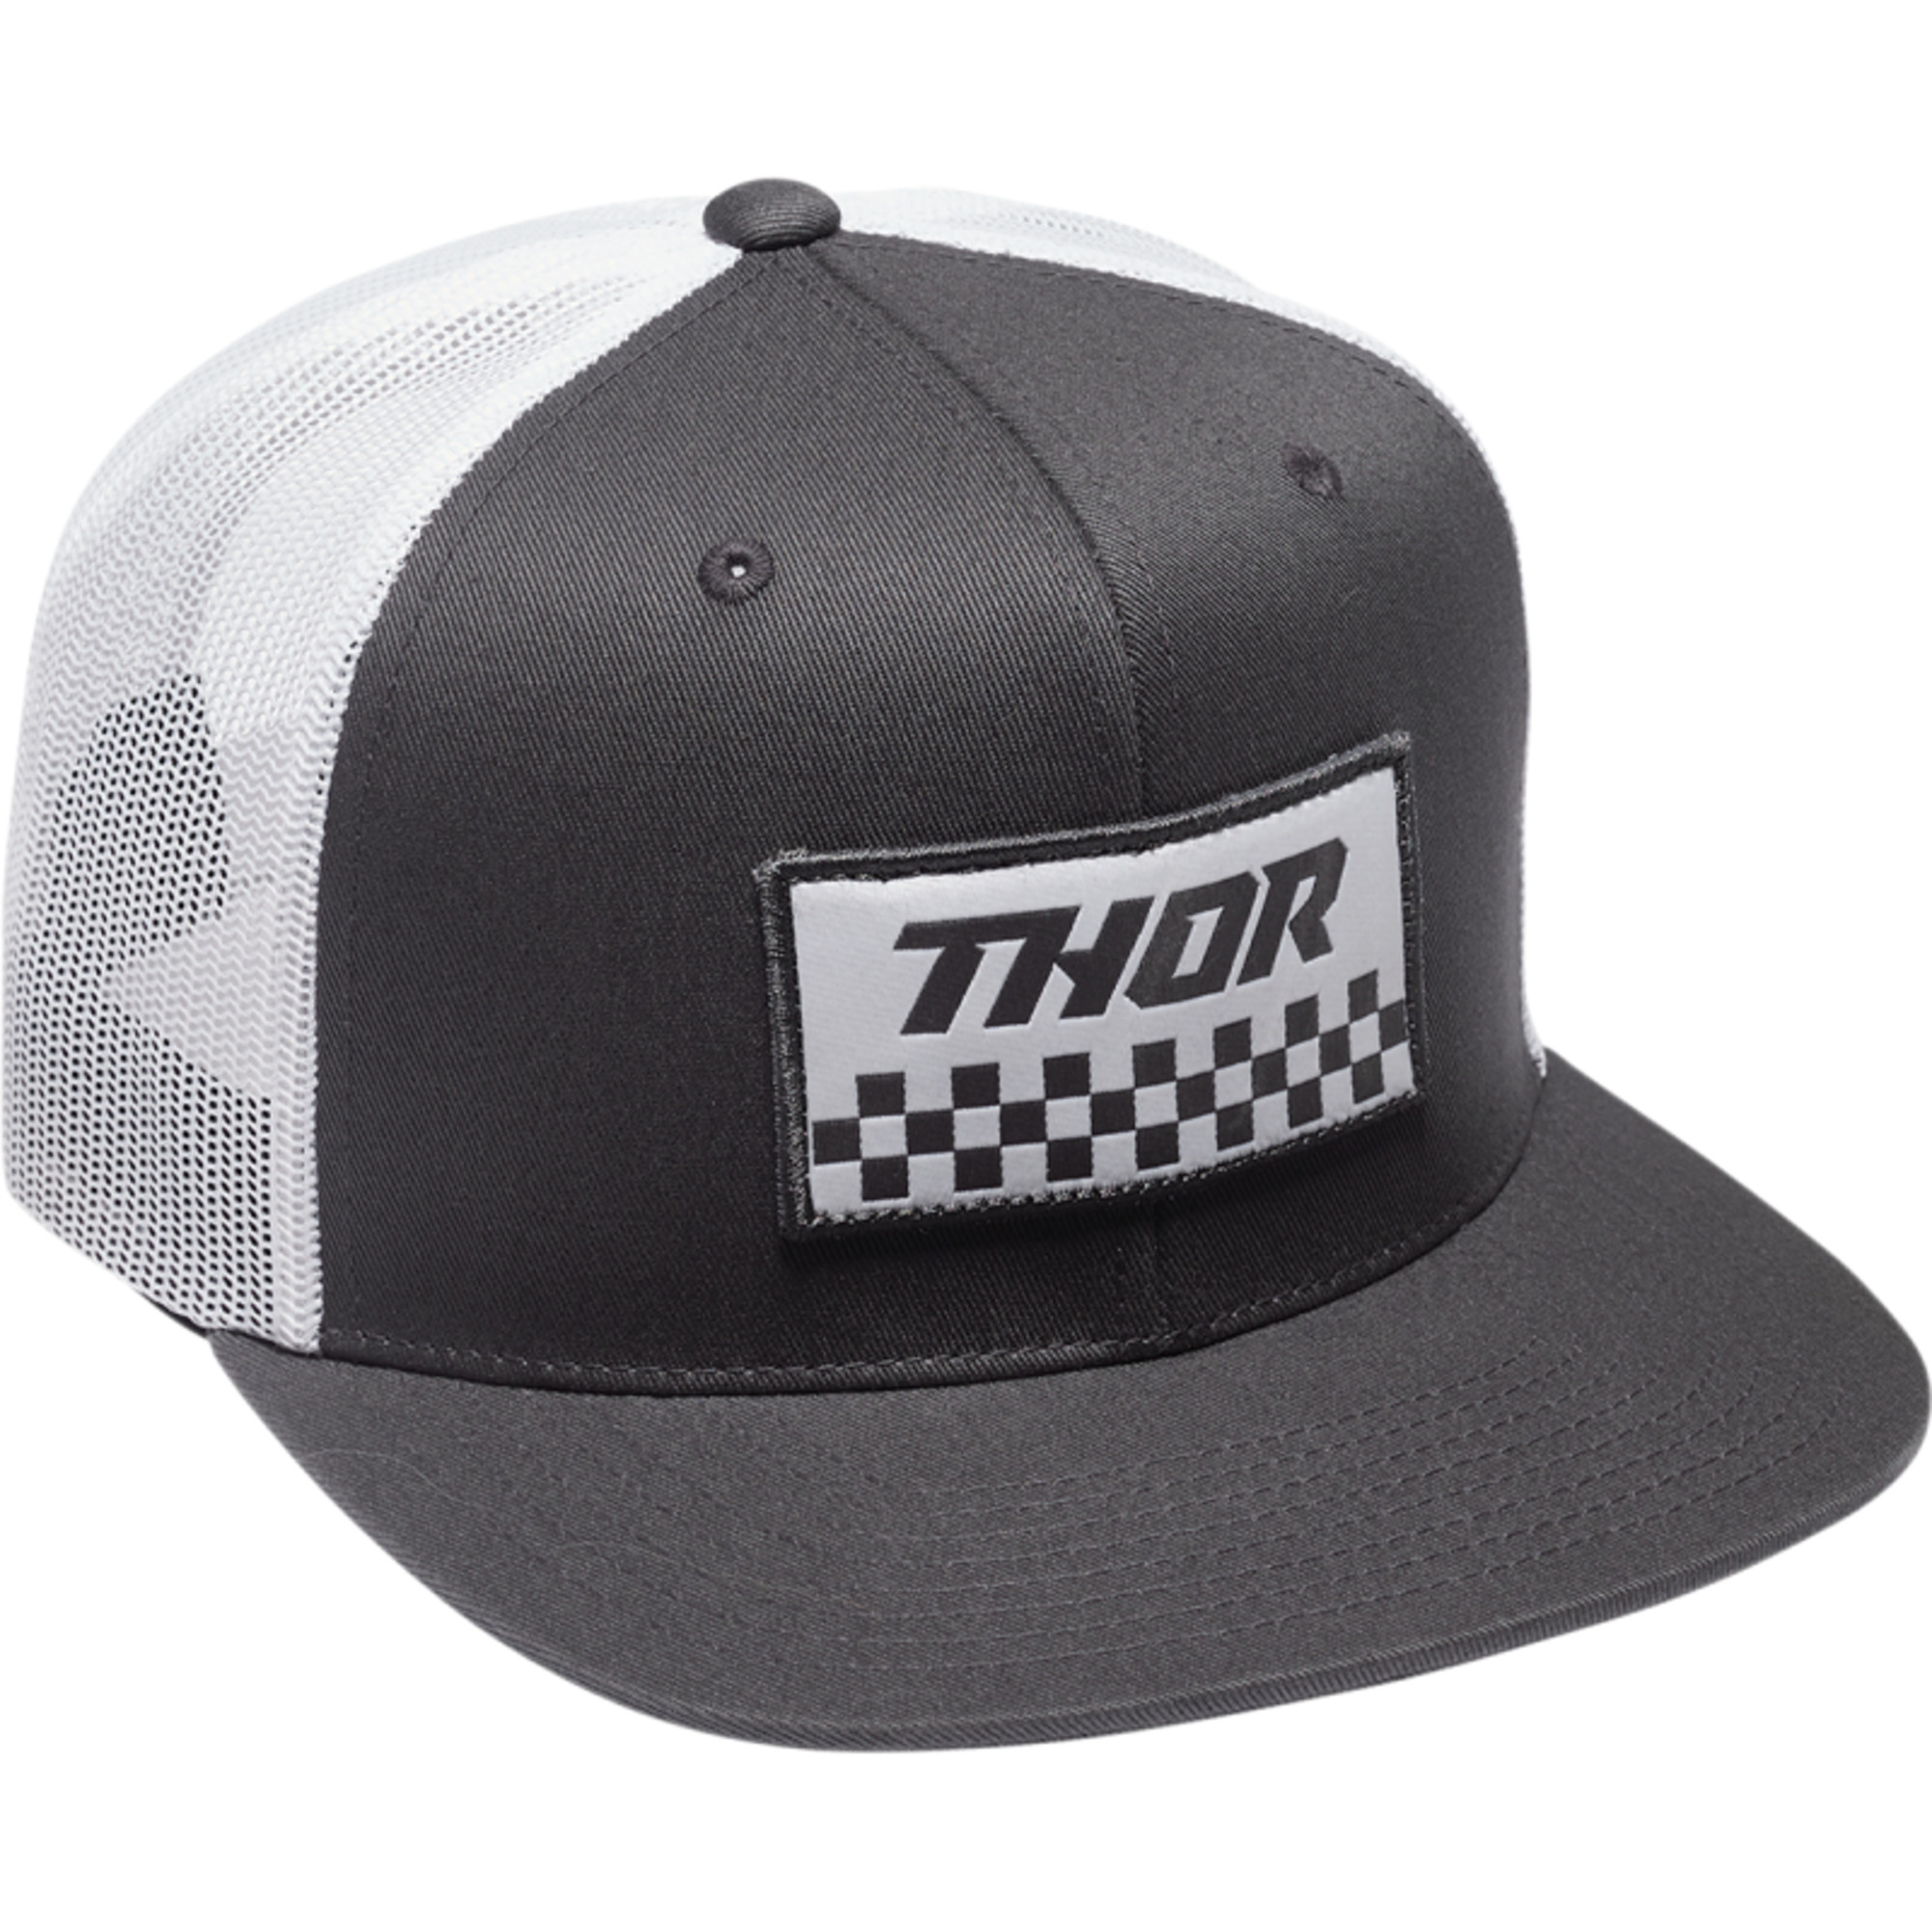 thor snapback hats for men damiers